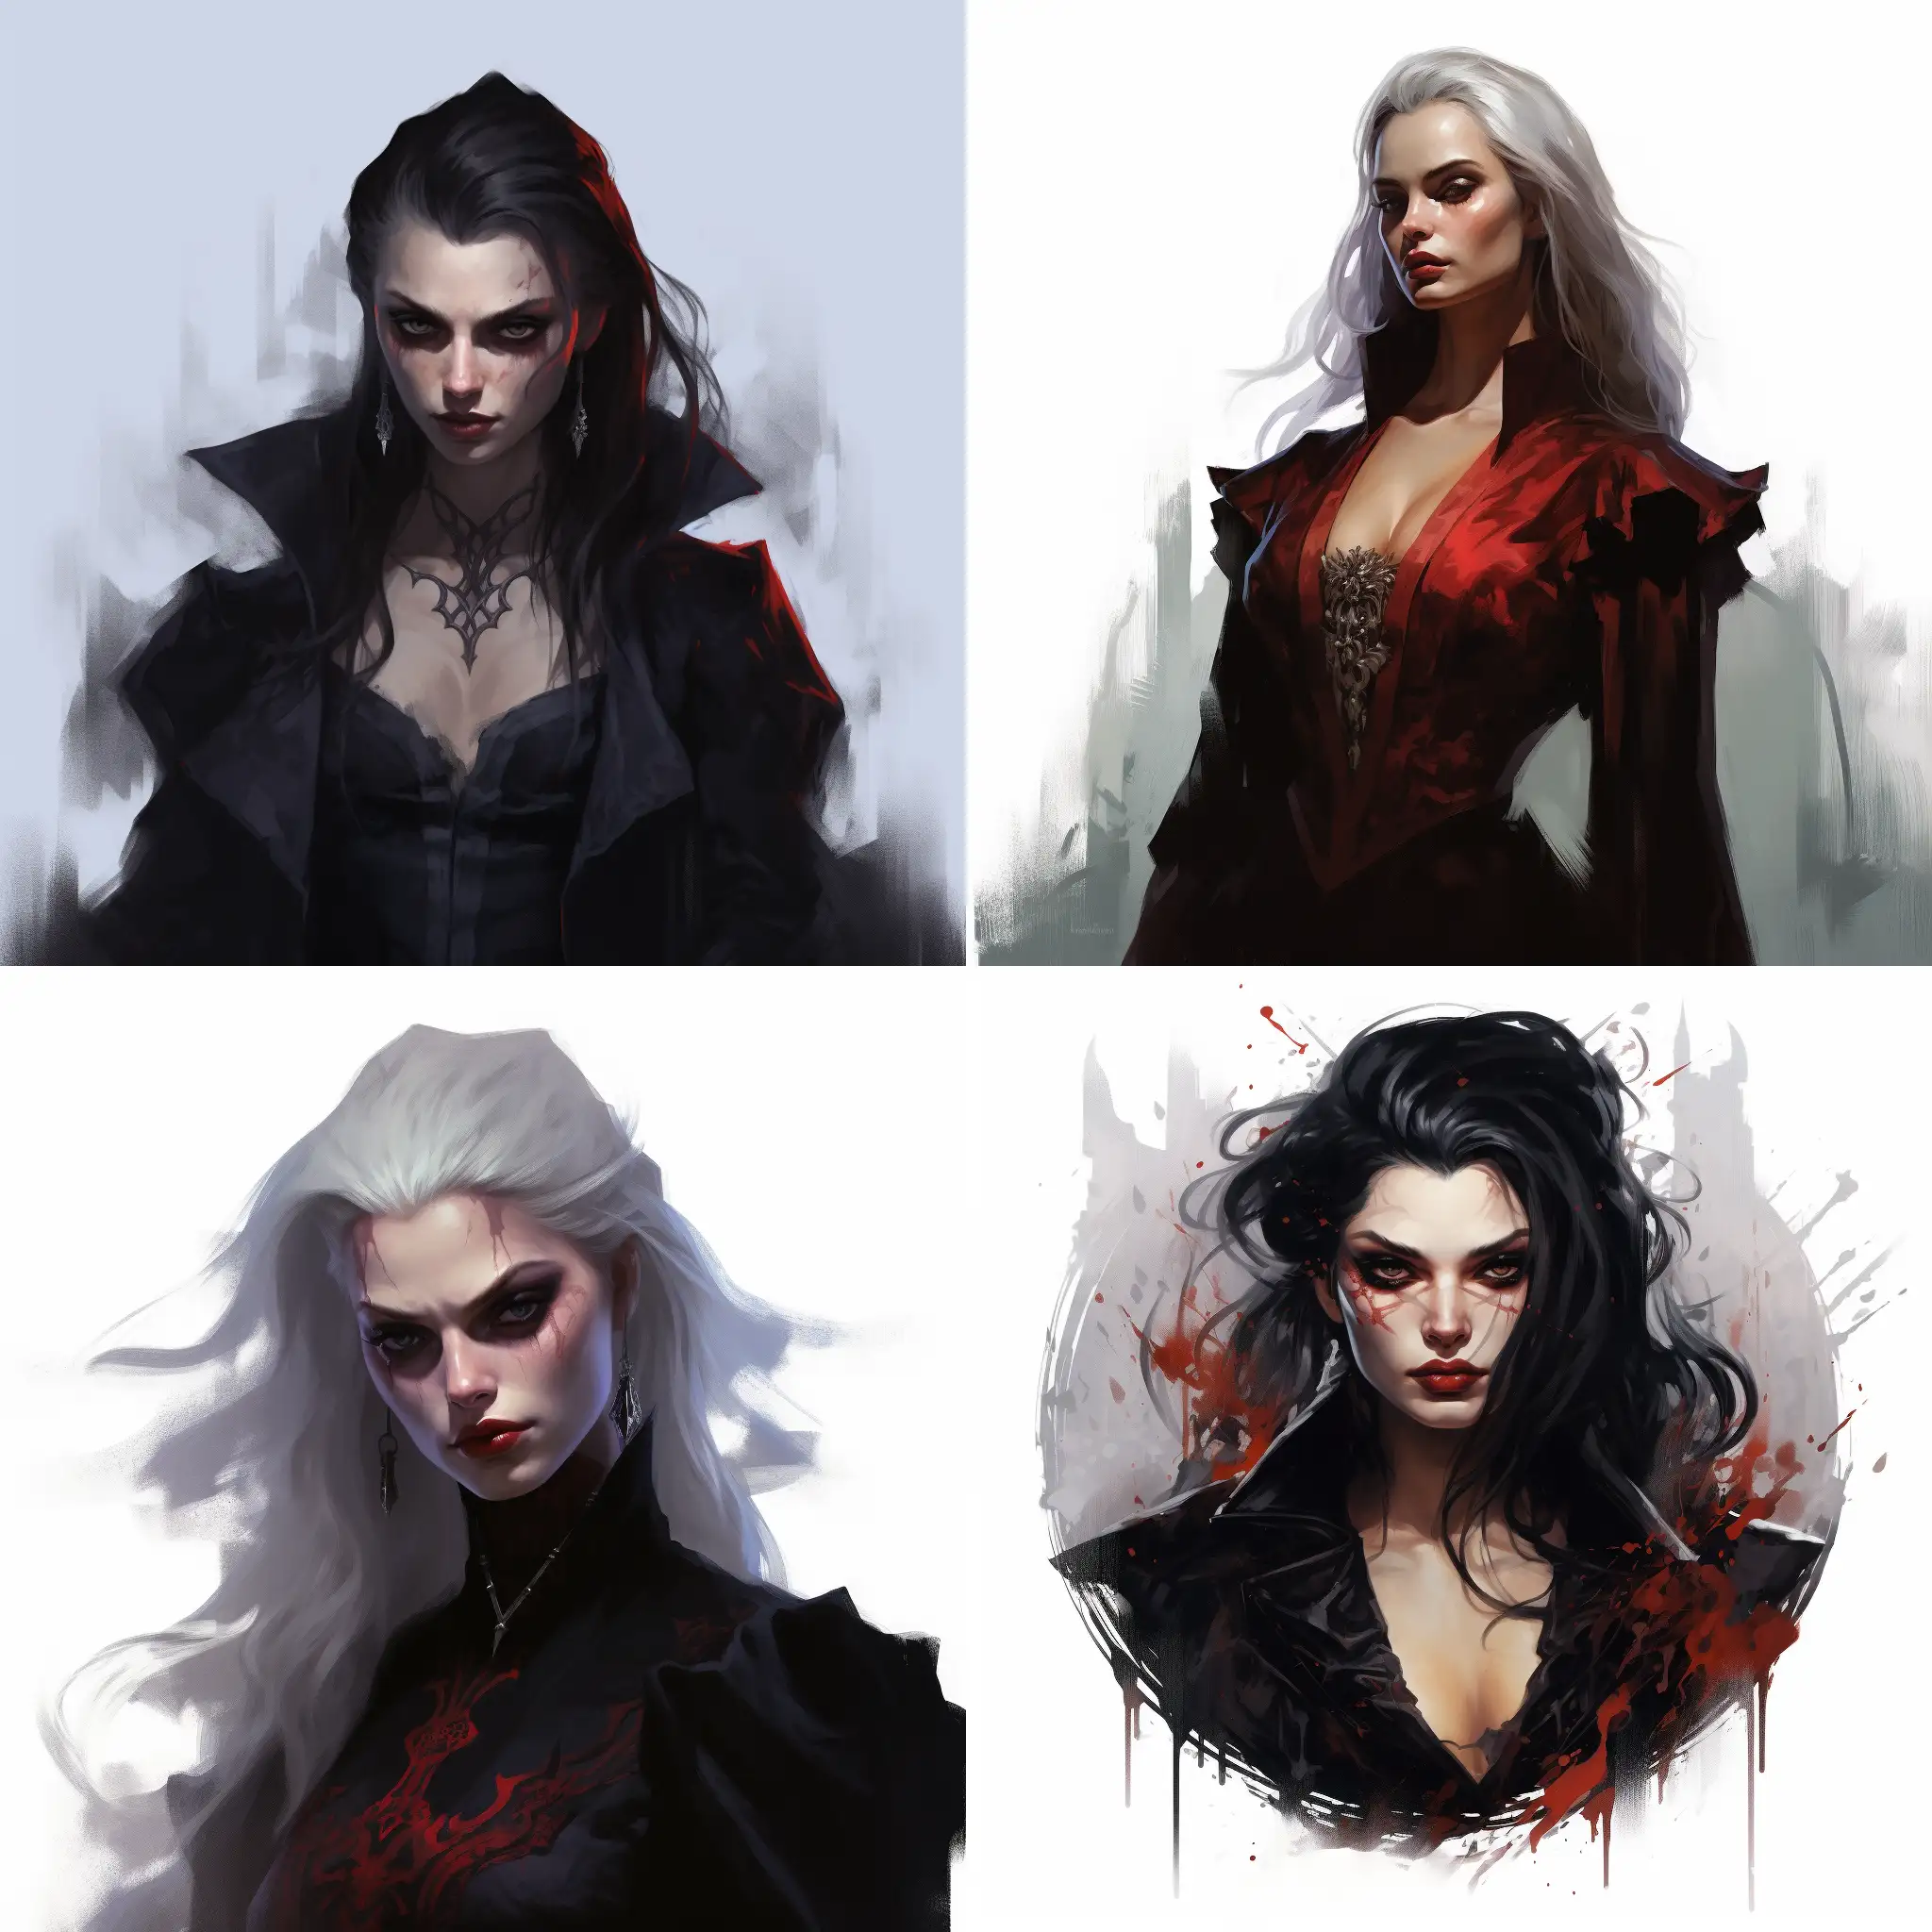 Ethereal-Vampire-in-Dungeons-Dragons-Artwork